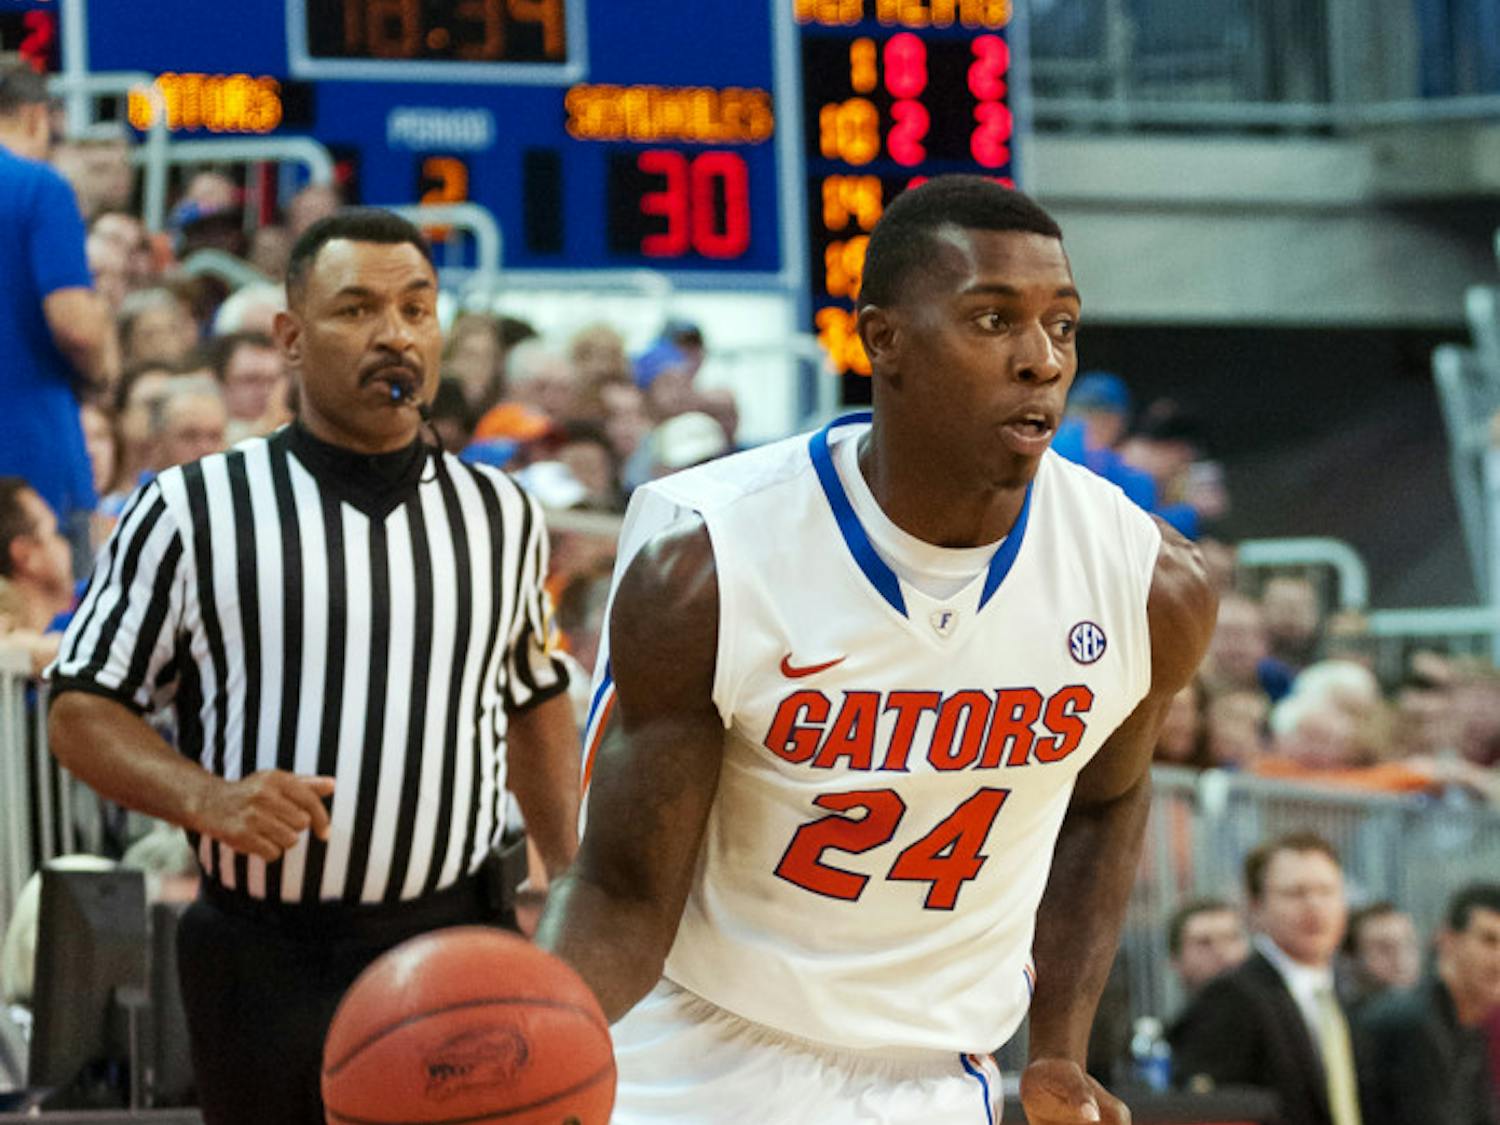 Casey Prather dribbles during Florida’s 67-66 win against Florida State on Nov. 29, 2013, in the O’Connell Center.